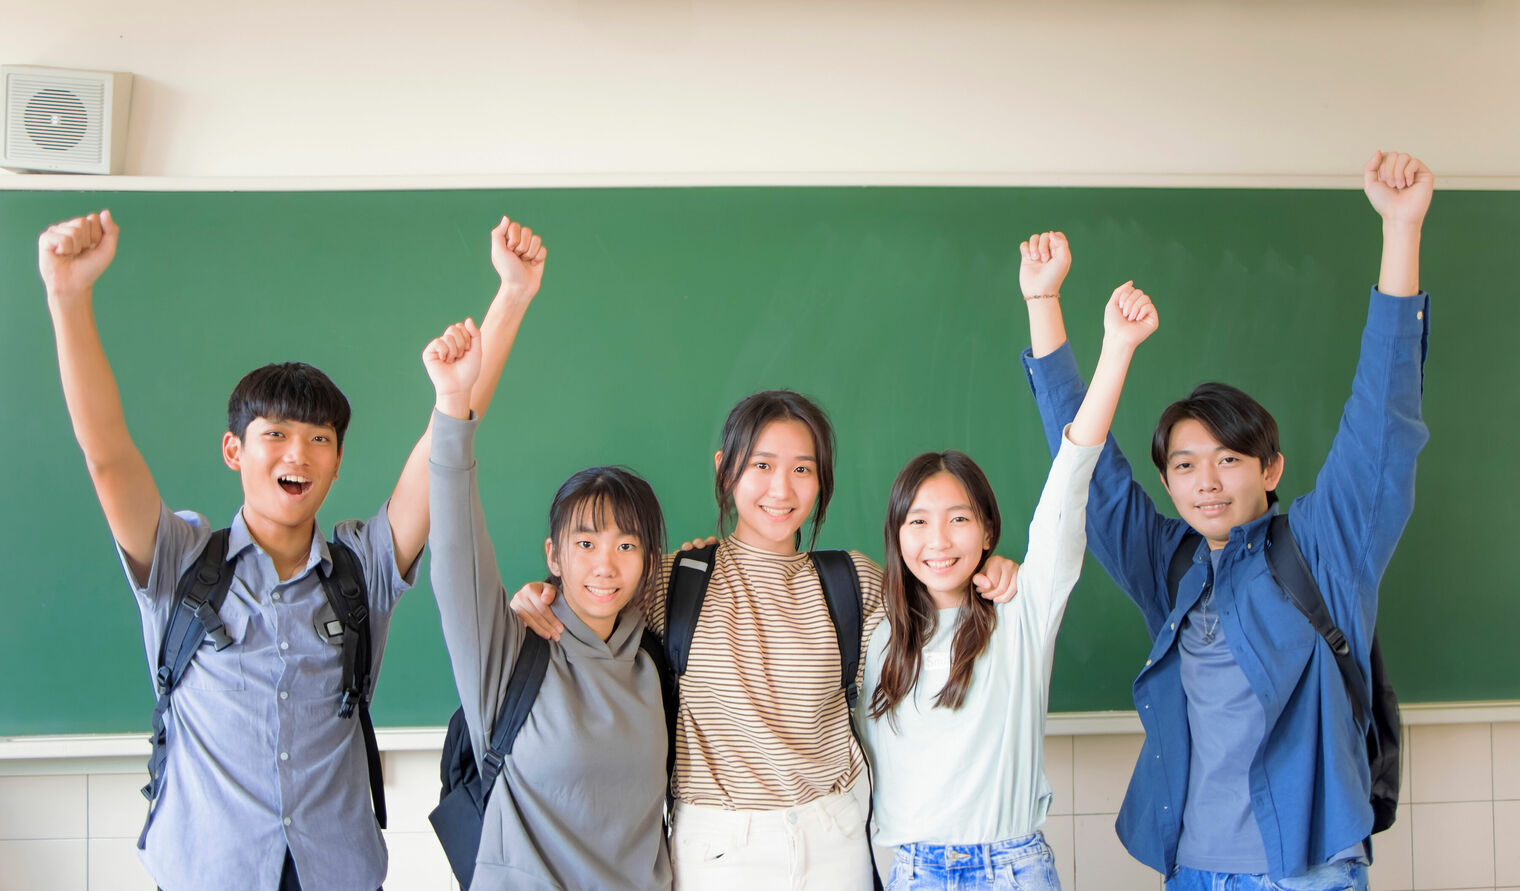 students standing side by side with their arms up in the air